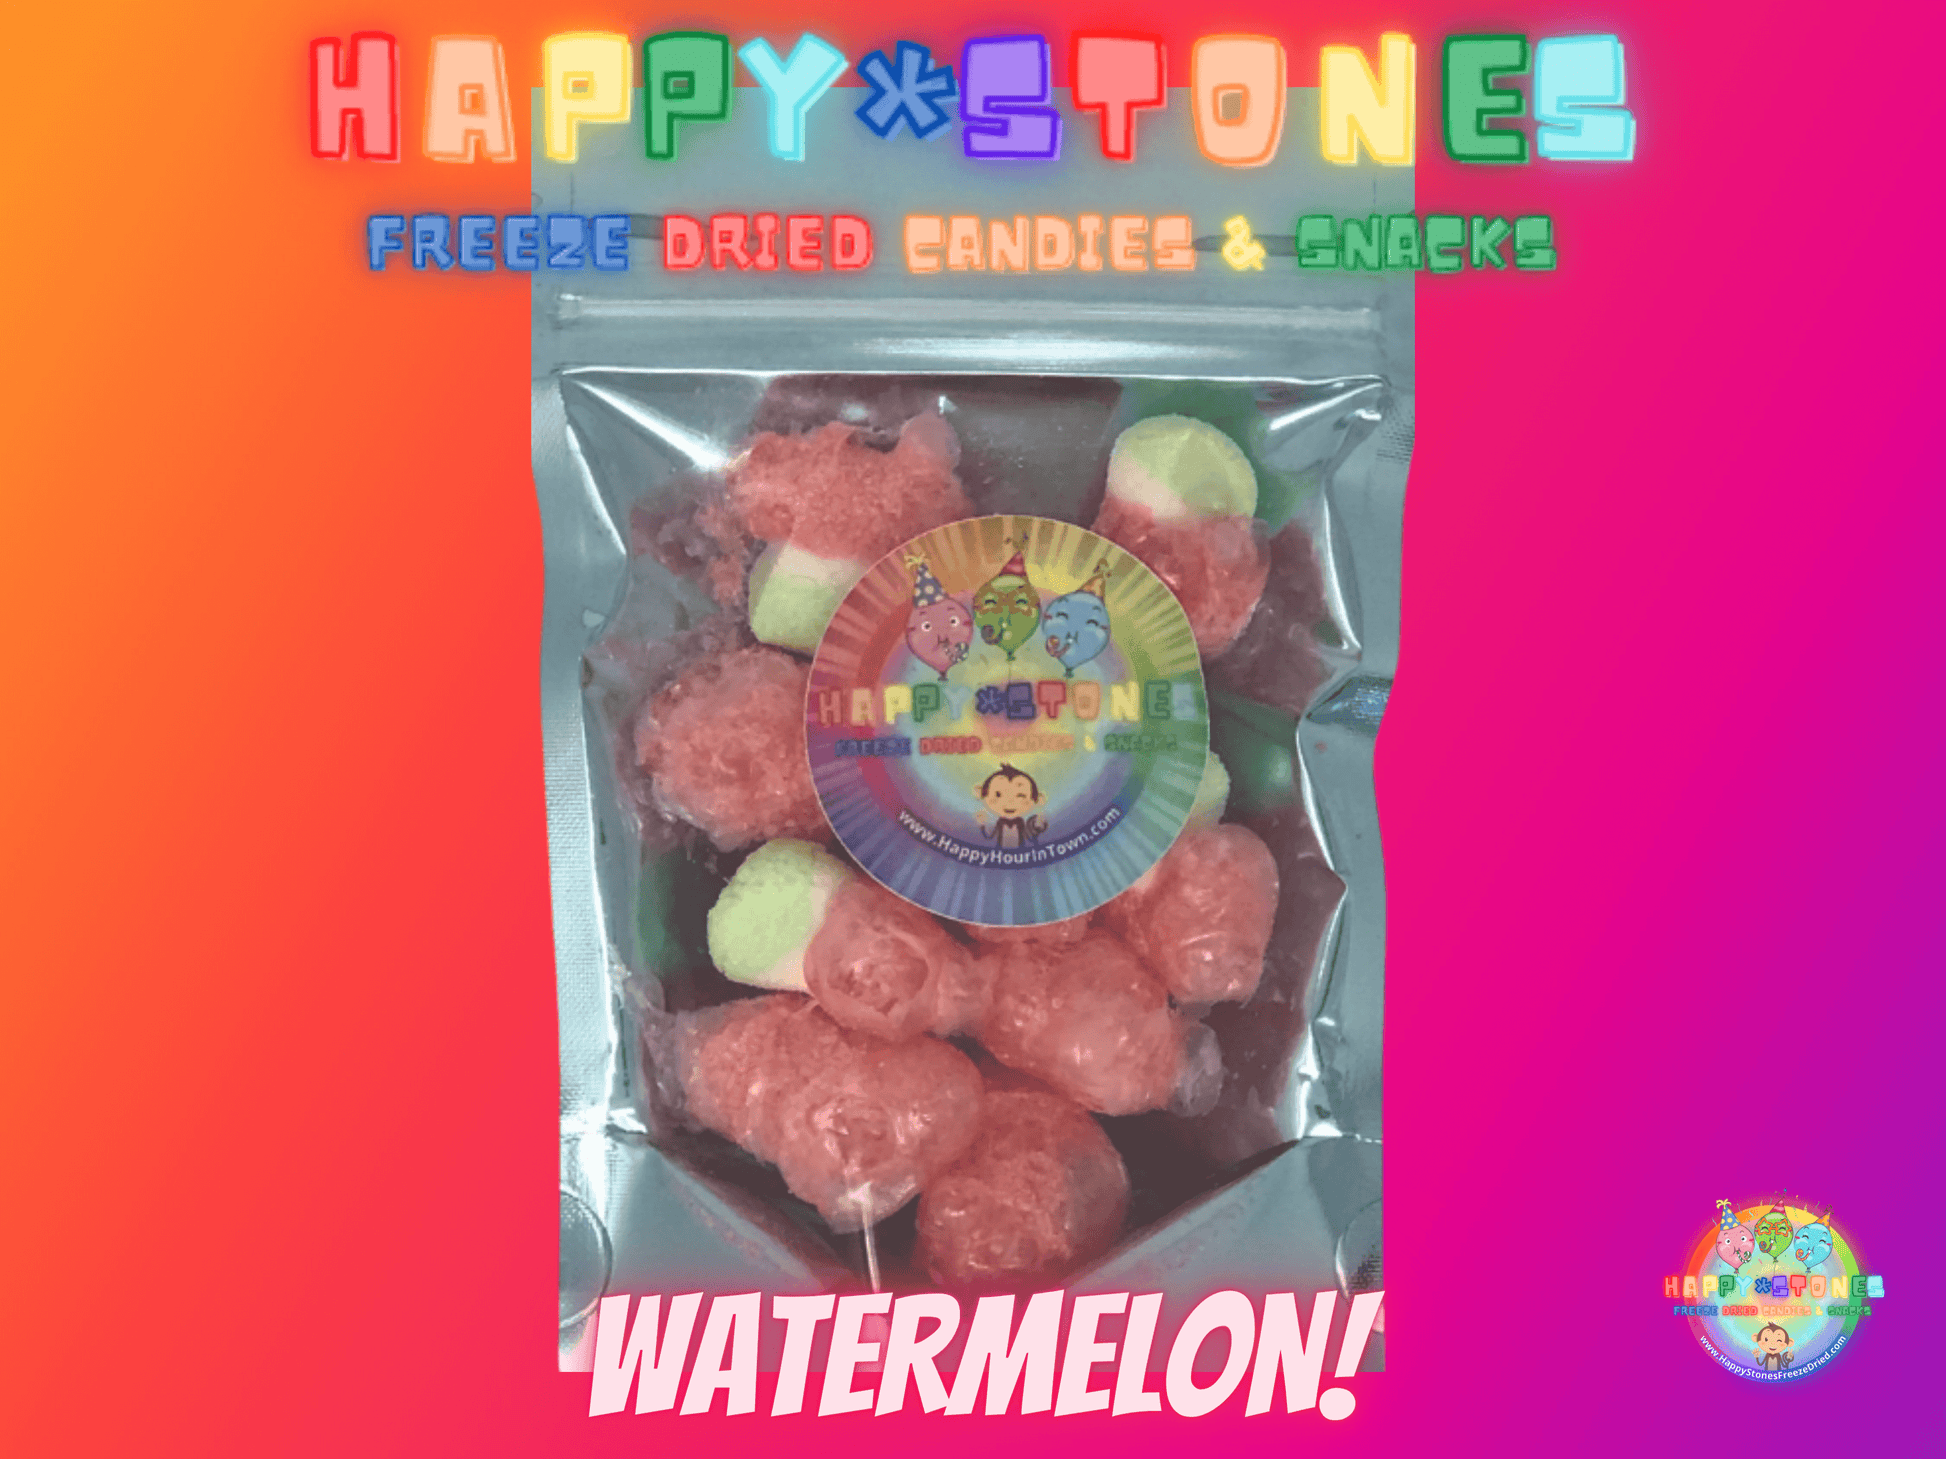 Summertime Stones Freeze Dried Watermelon Gummy Candy Etsy Freeze Dried Candy Shop Buy TikTok Candy